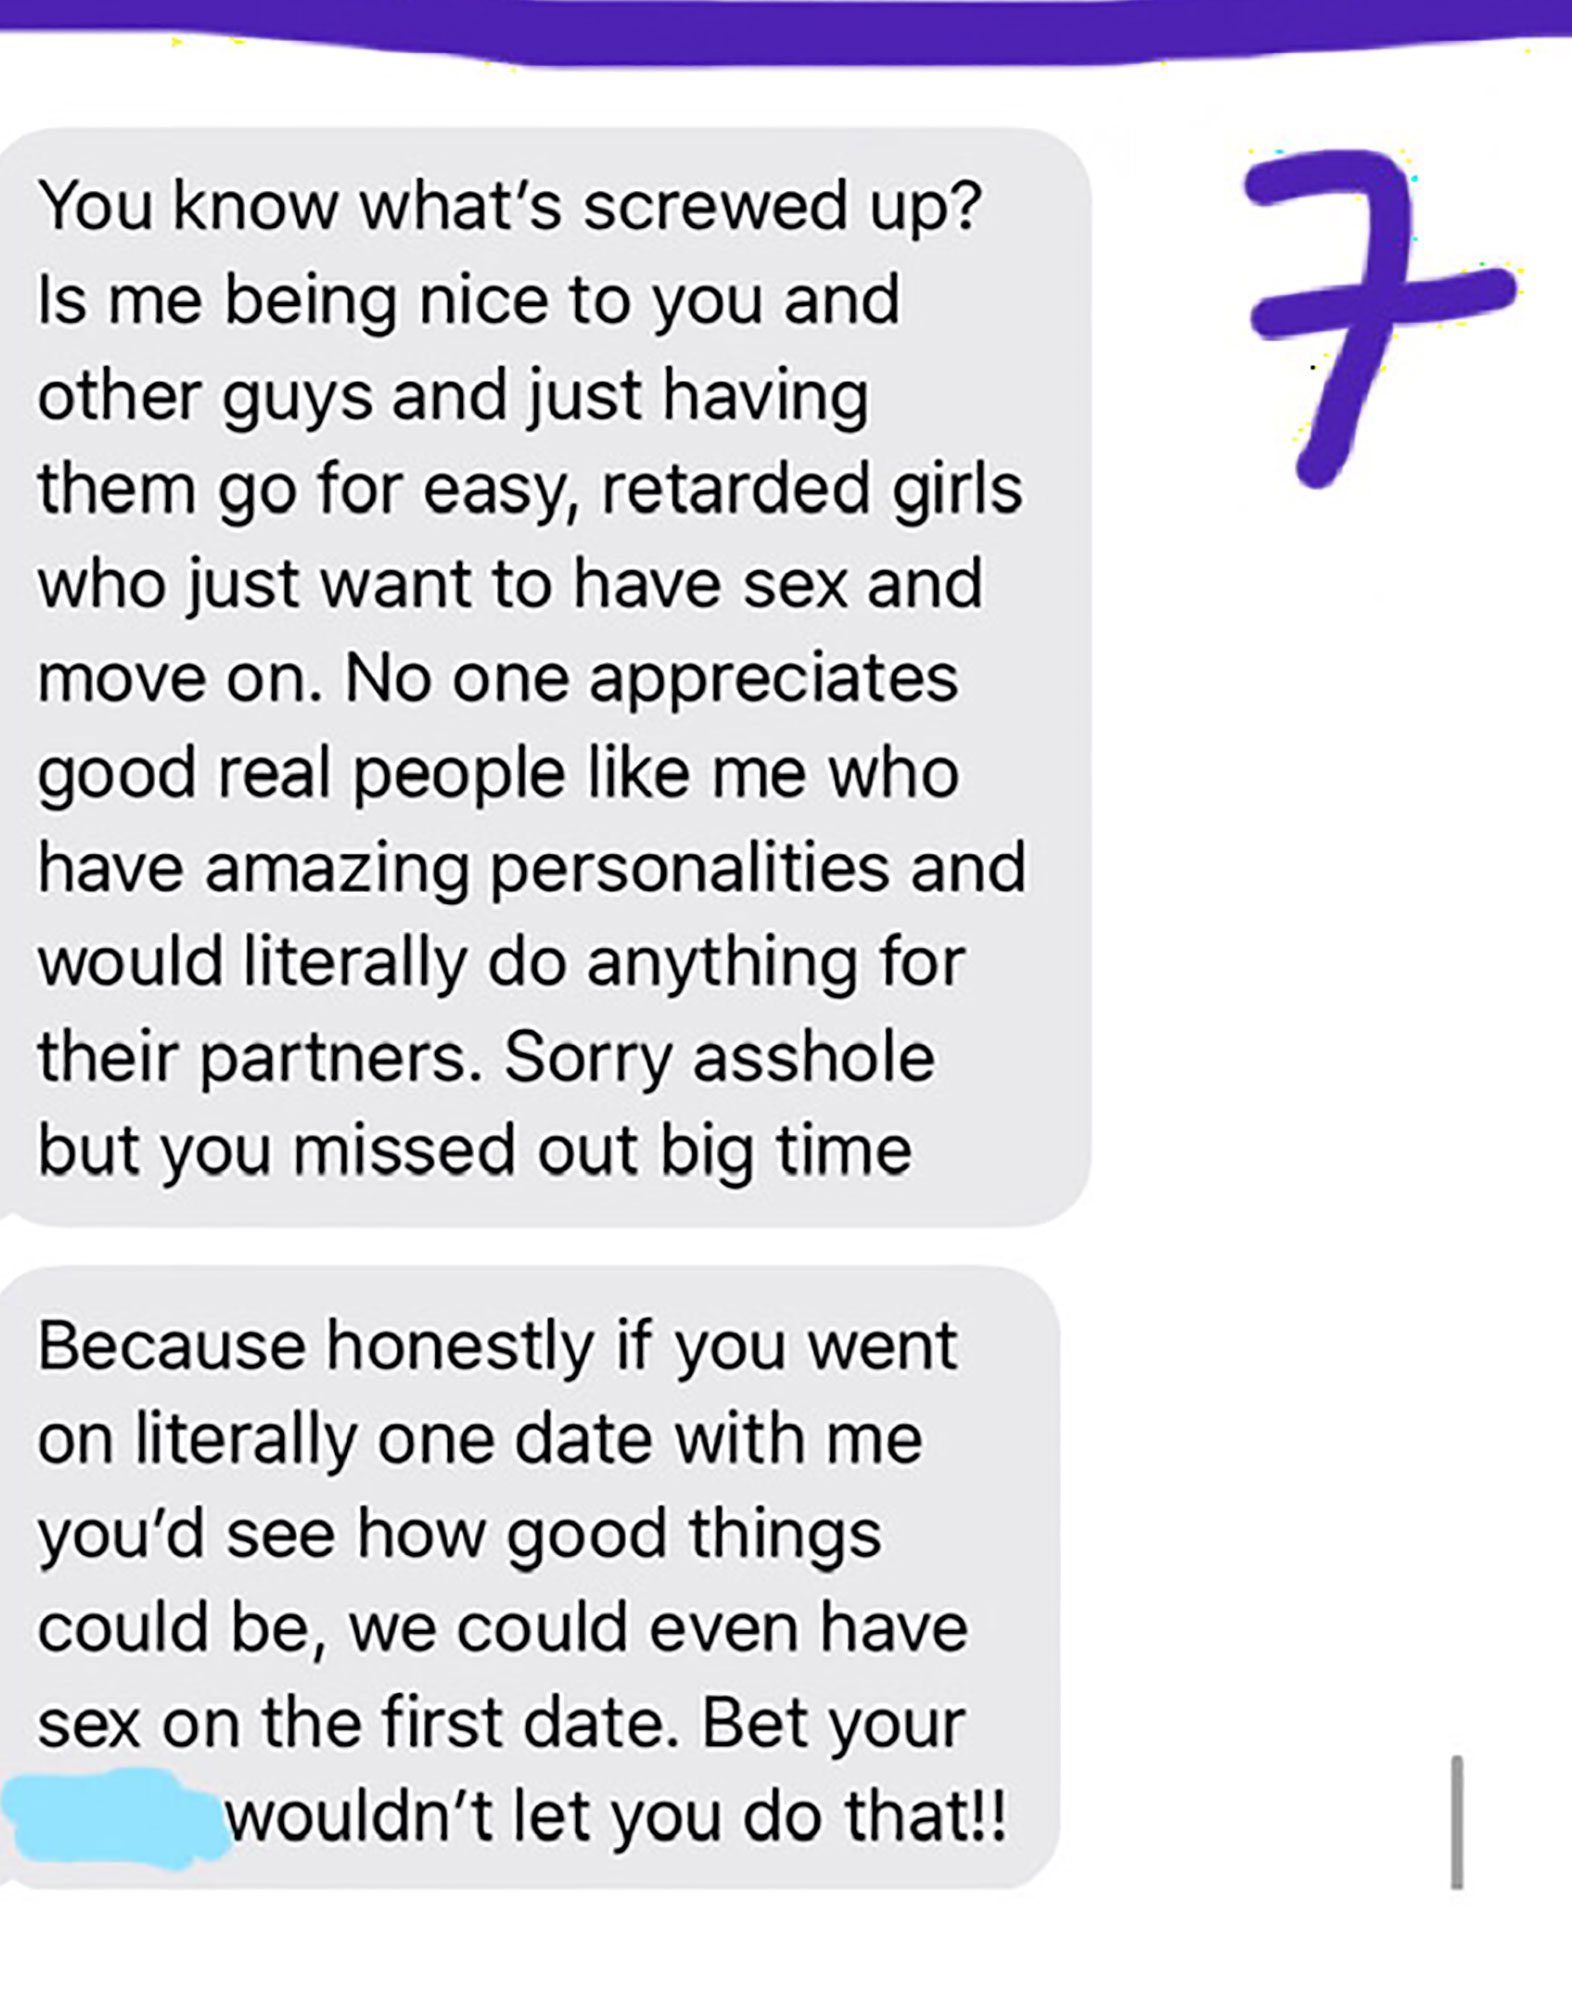 document - You know what's screwed up? Is me being nice to you and other guys and just having them go for easy, retarded girls who just want to have sex and move on. No one appreciates good real people me who have amazing personalities and would literally